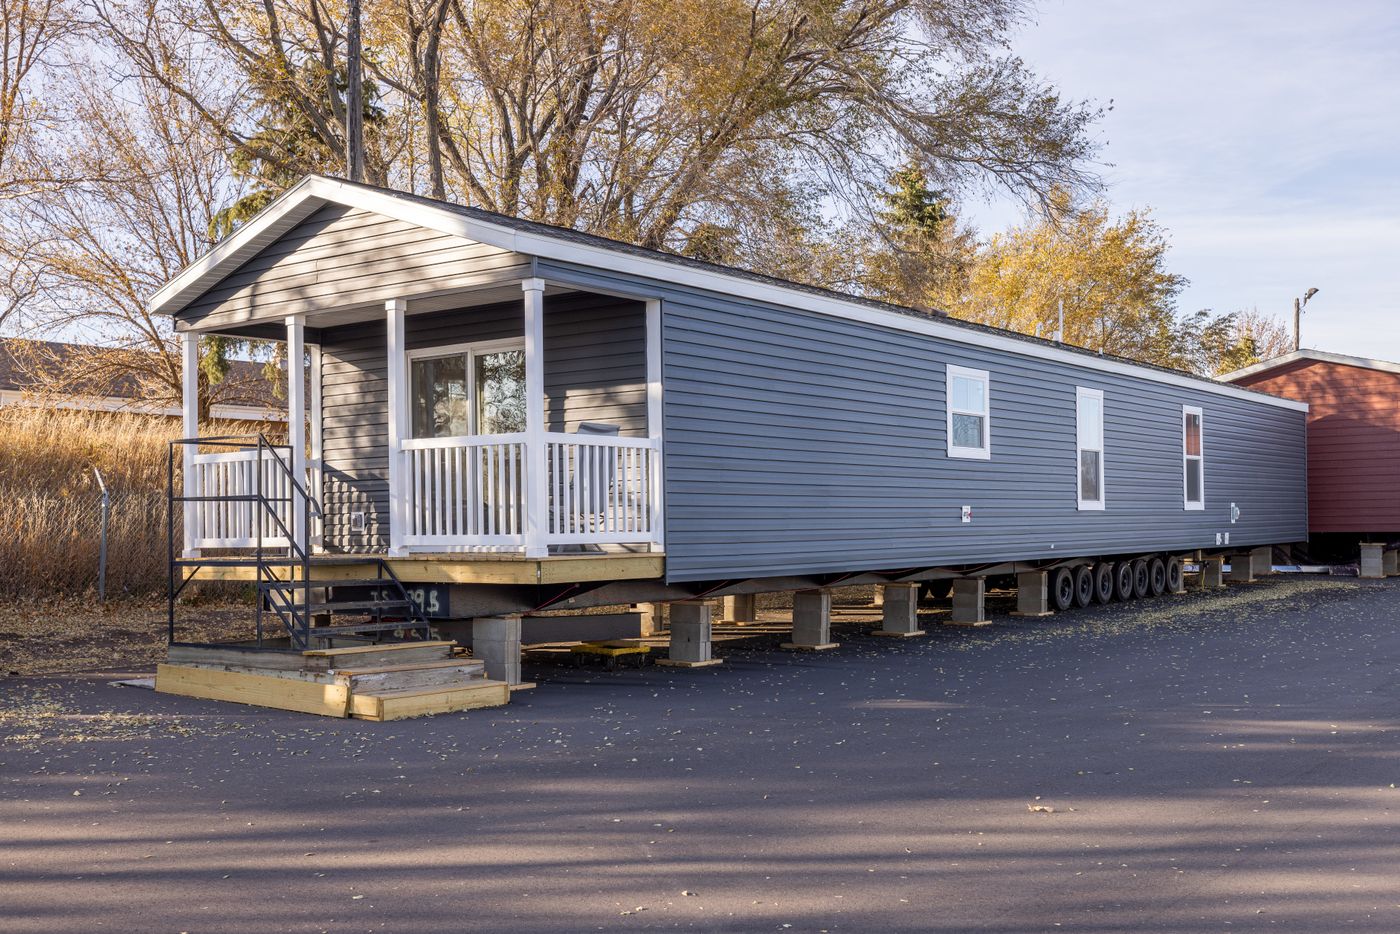 The RAMSEY 217-1 Exterior. This Manufactured Mobile Home features 3 bedrooms and 2 baths.